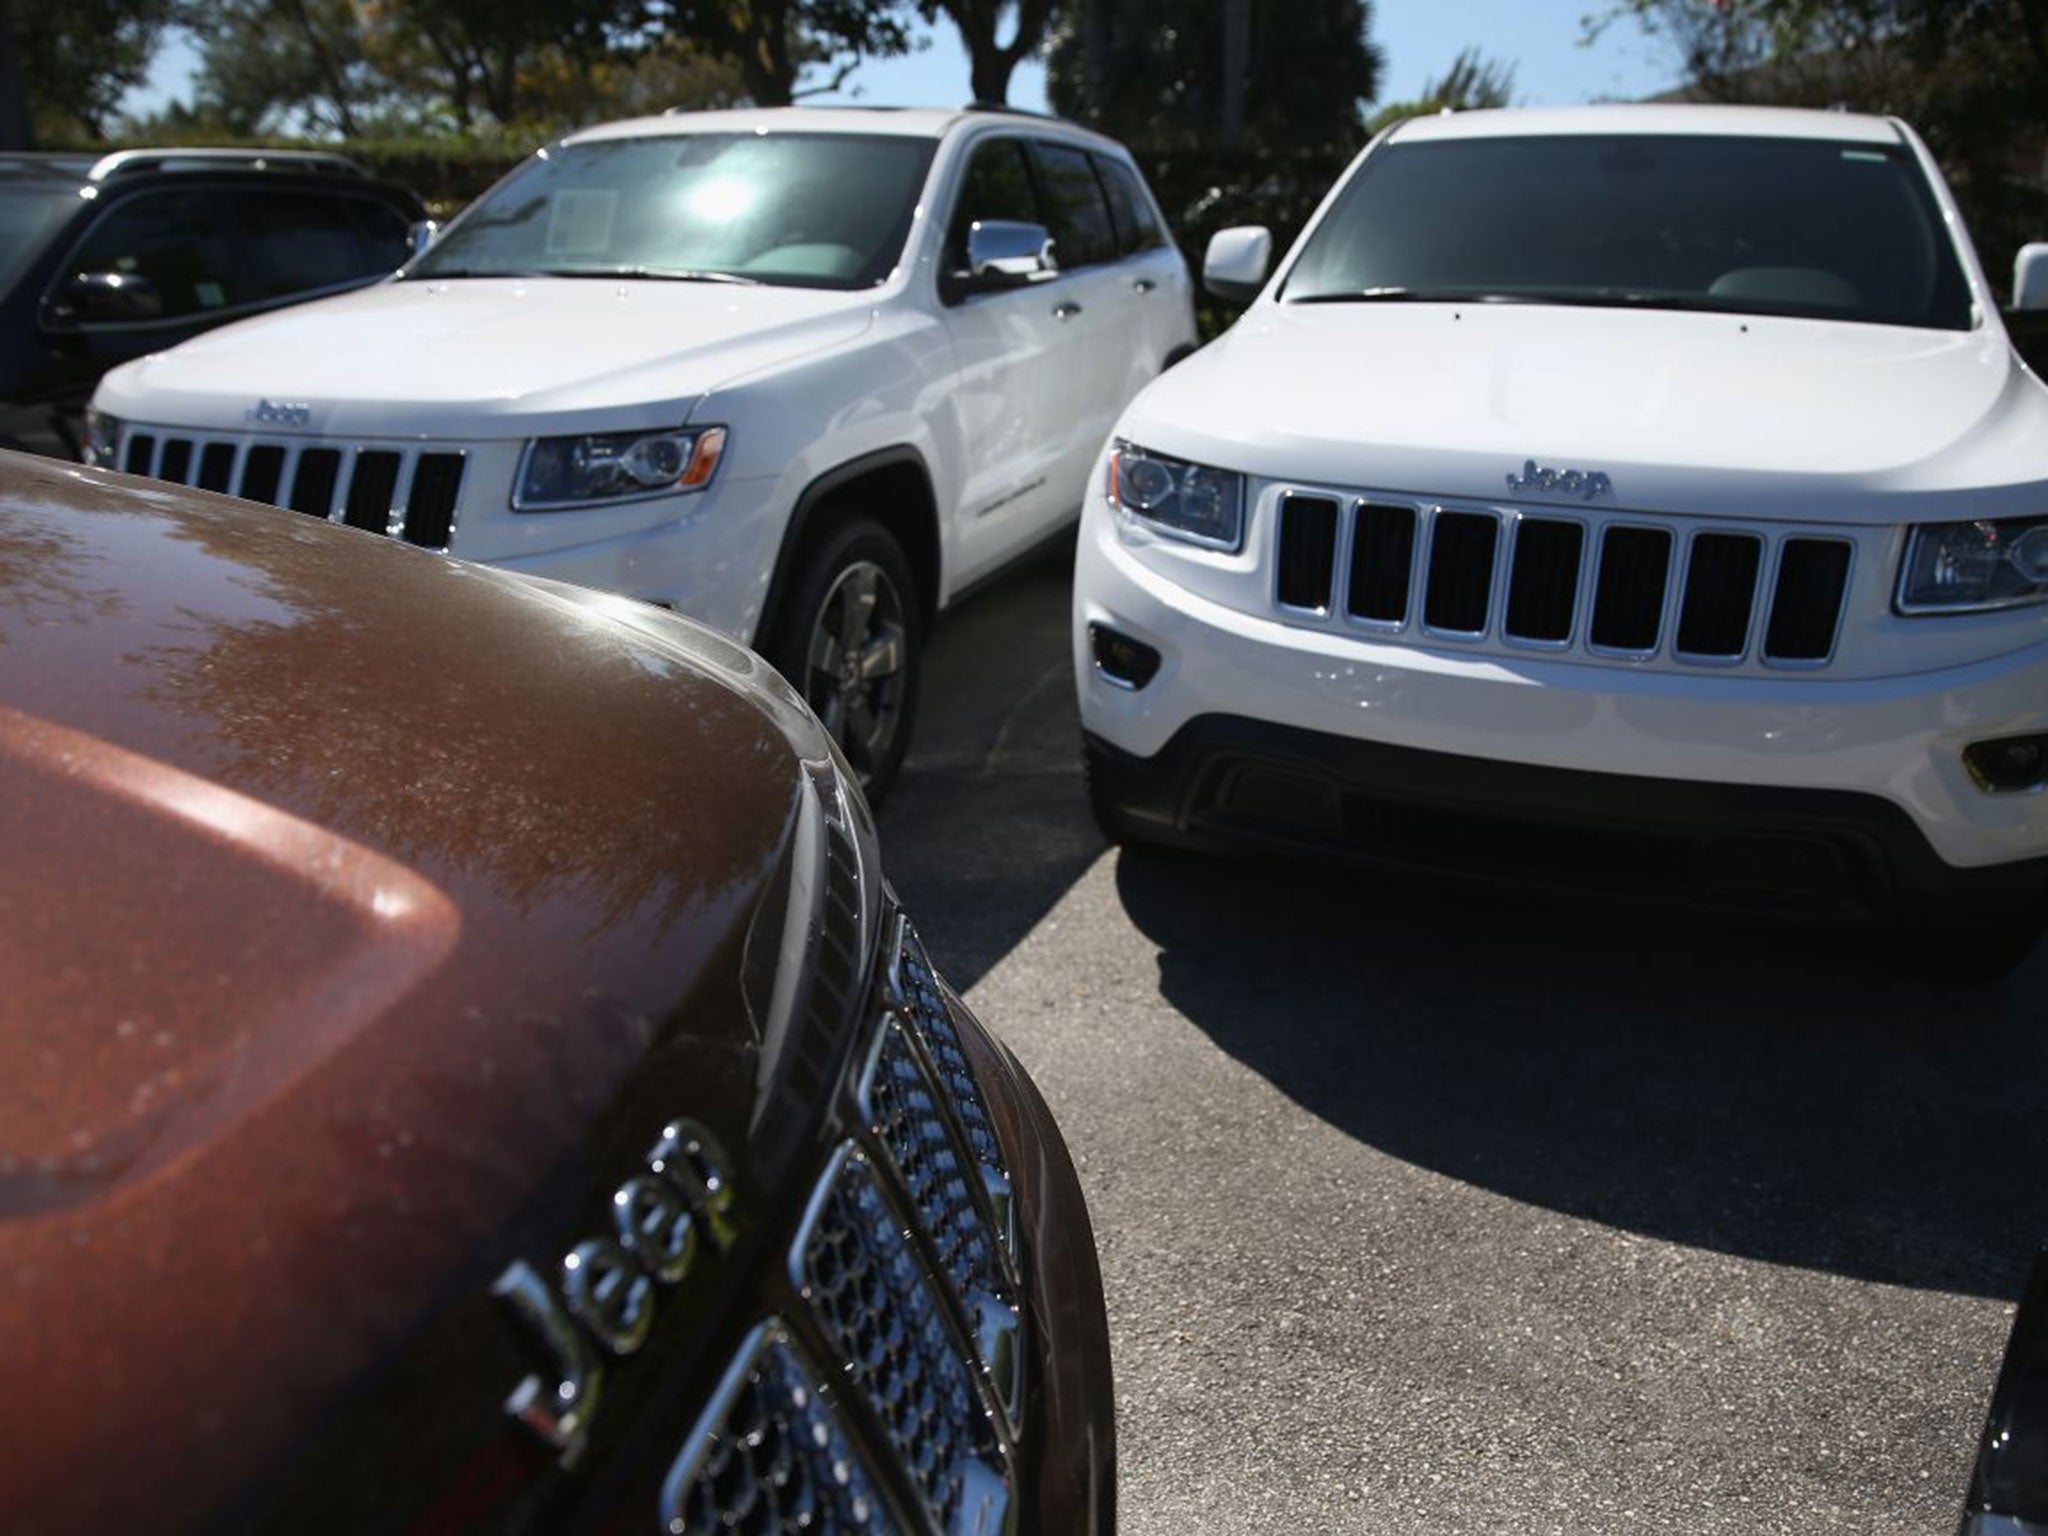 Last year Fiat Chrysler recalled 1.4 million vehicles in the US after security researchers remotely controlled a Jeep